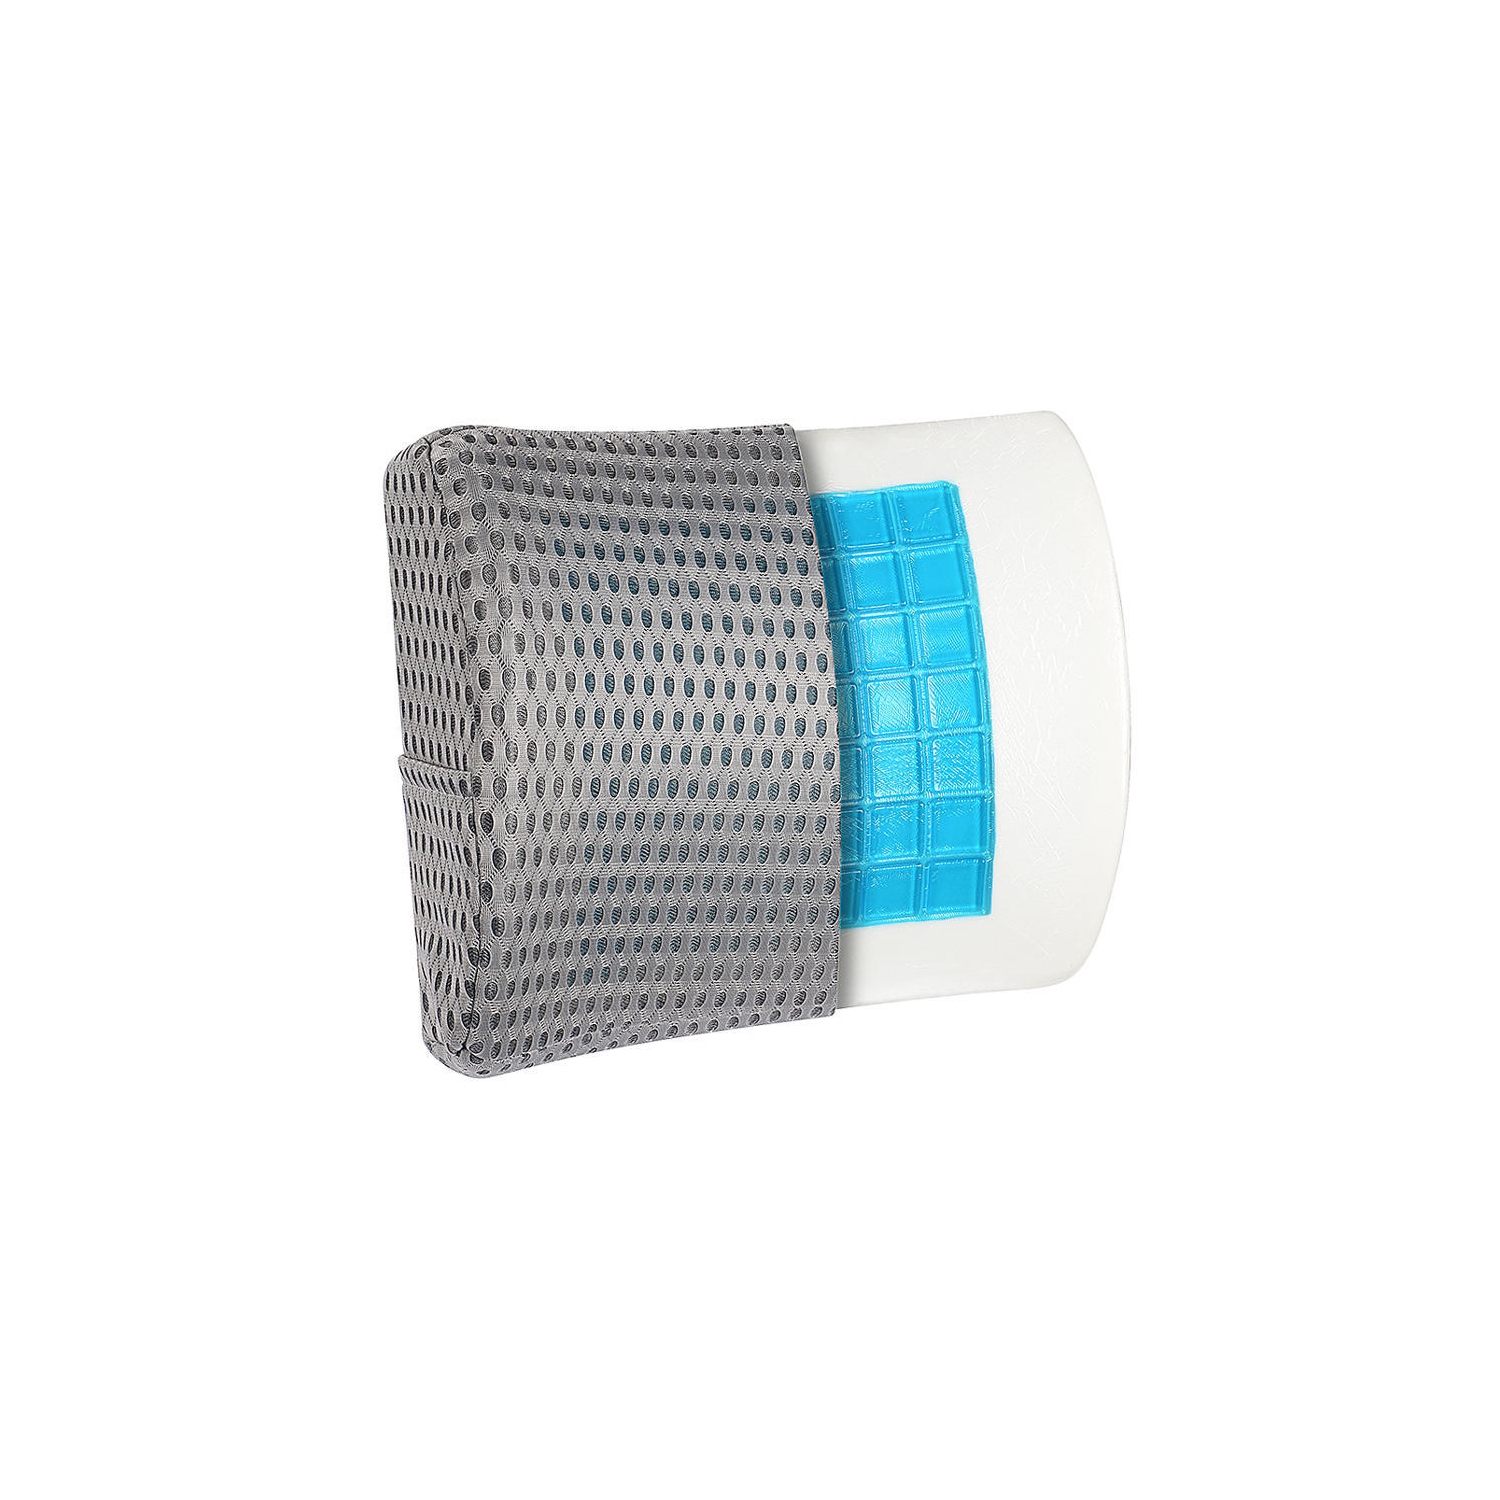  Onewell Cool Vent Cushion Mesh Back Lumbar Support